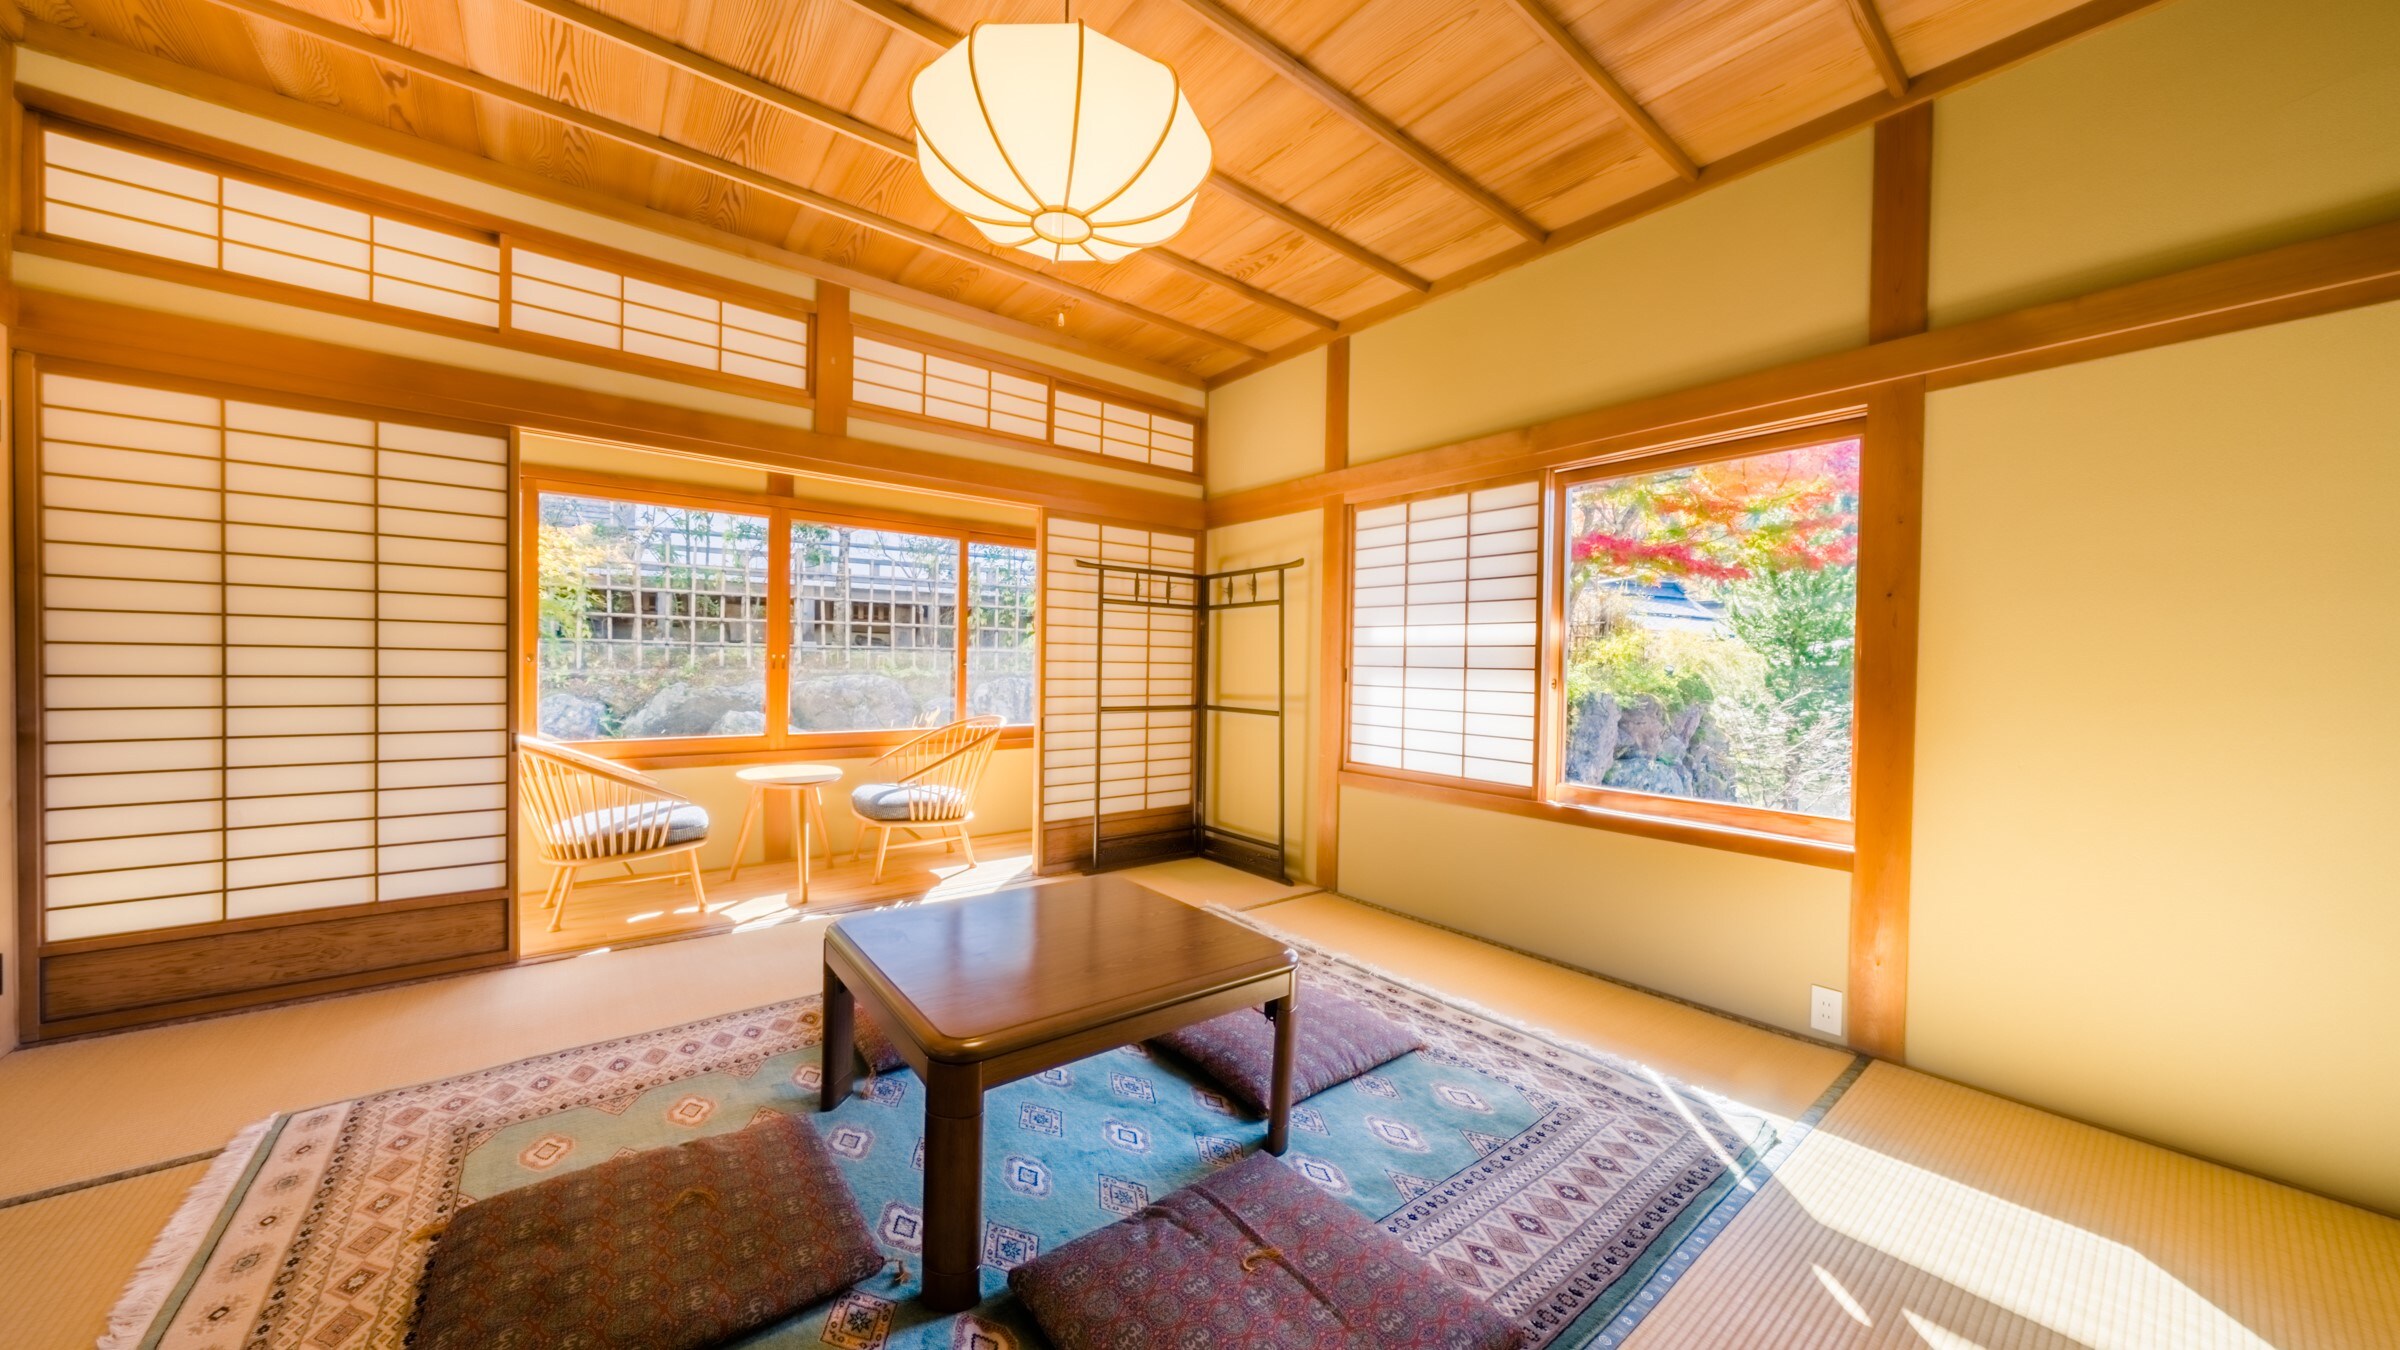 An example of a normal Japanese-style room